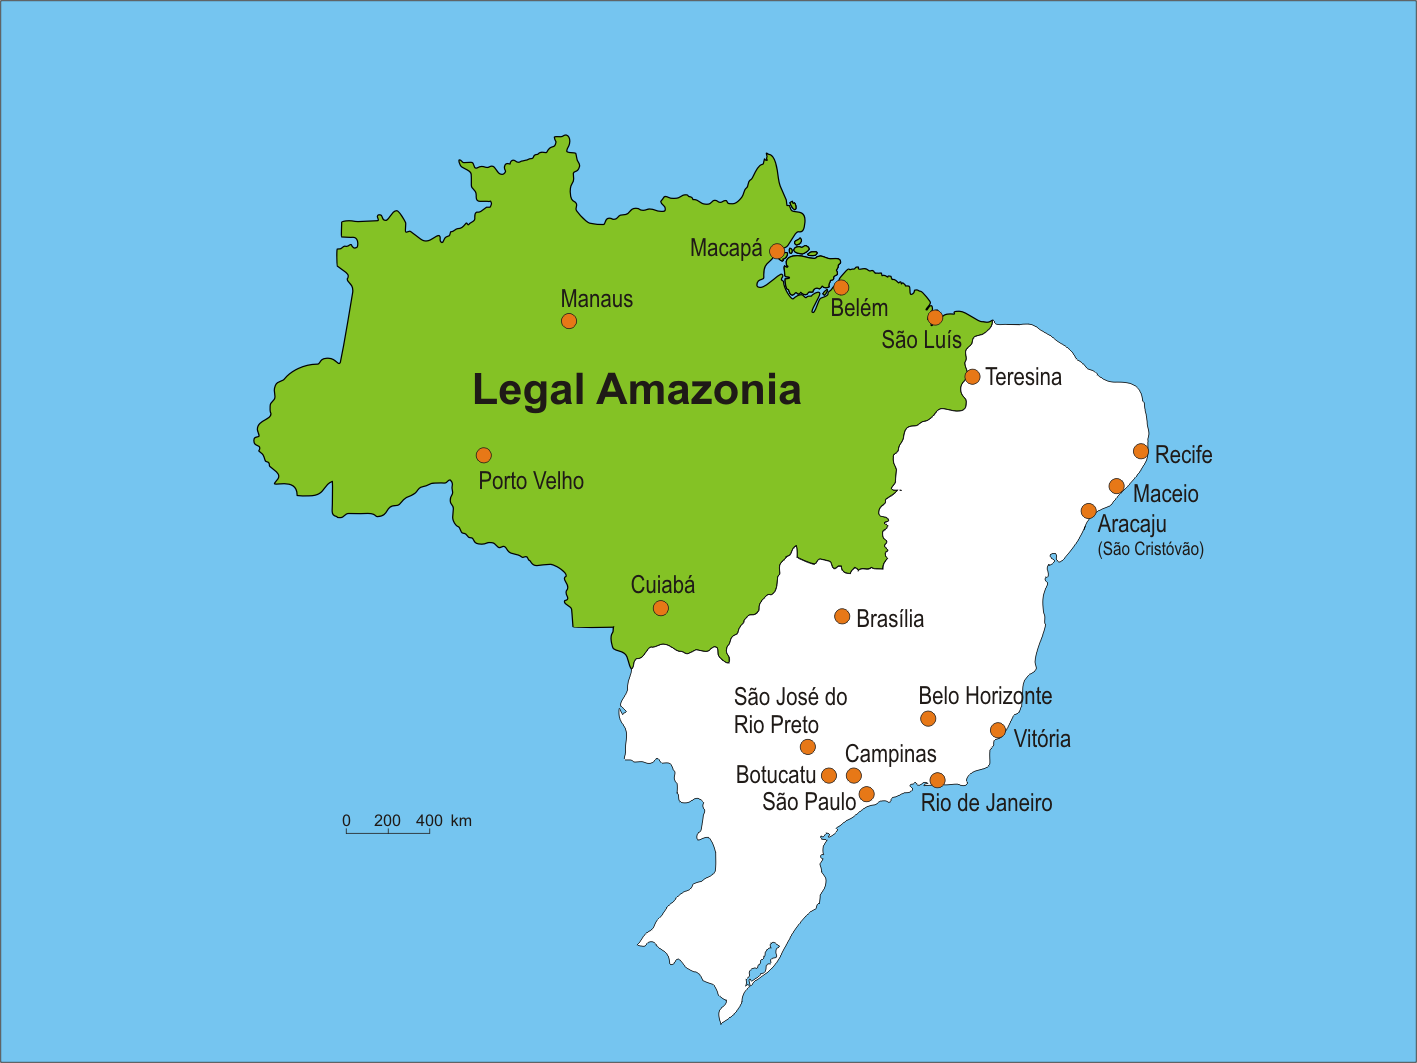 Malaria Transmission Area in Brazil AMAZON - 50% of Country territory - 12% of population -